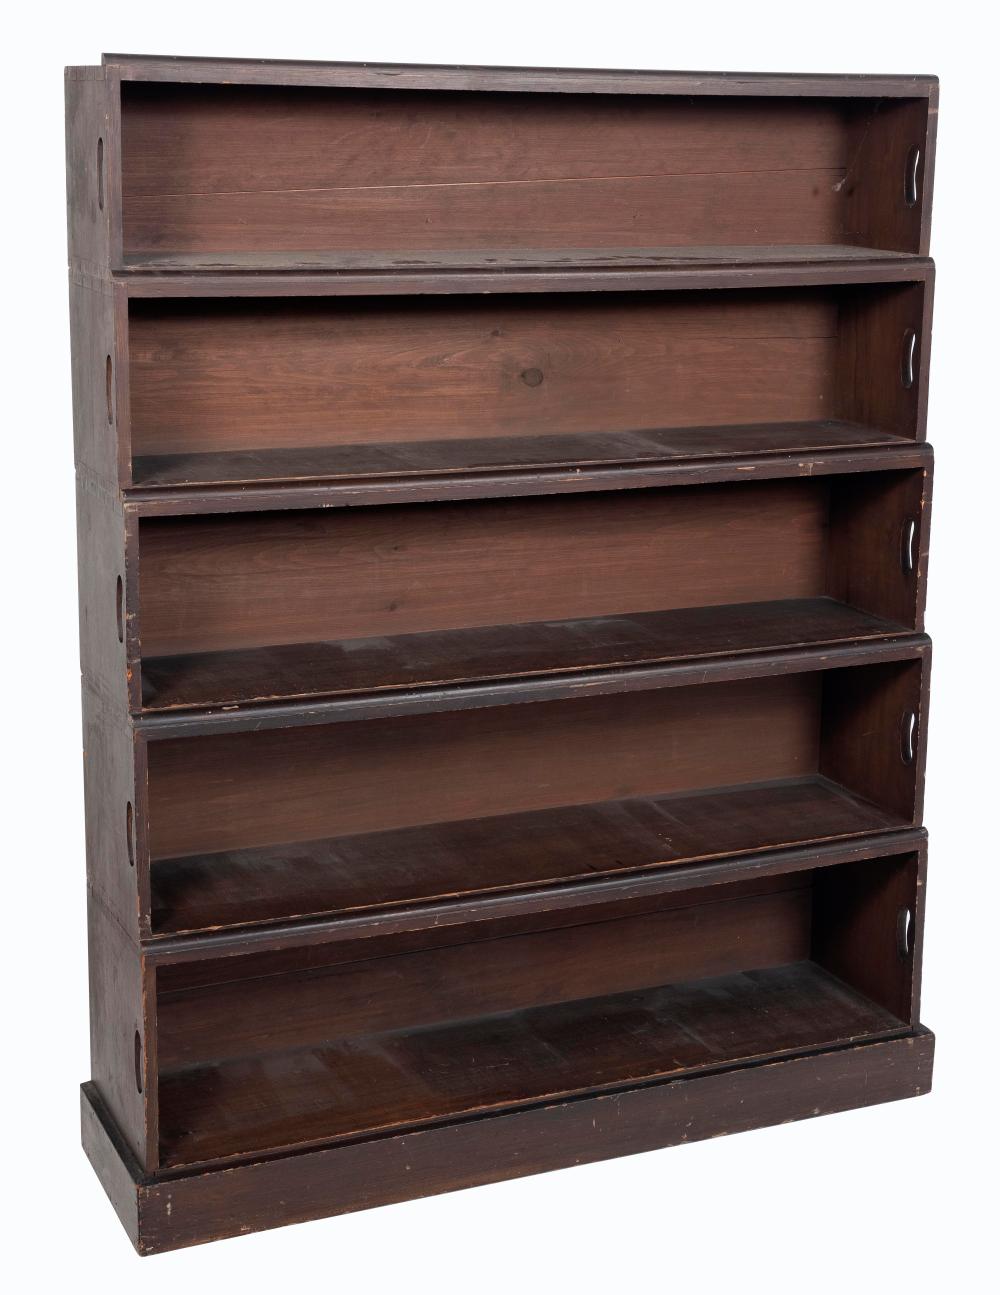 UNUSUAL FIVE SECTION STACKING SHELF 3b3631